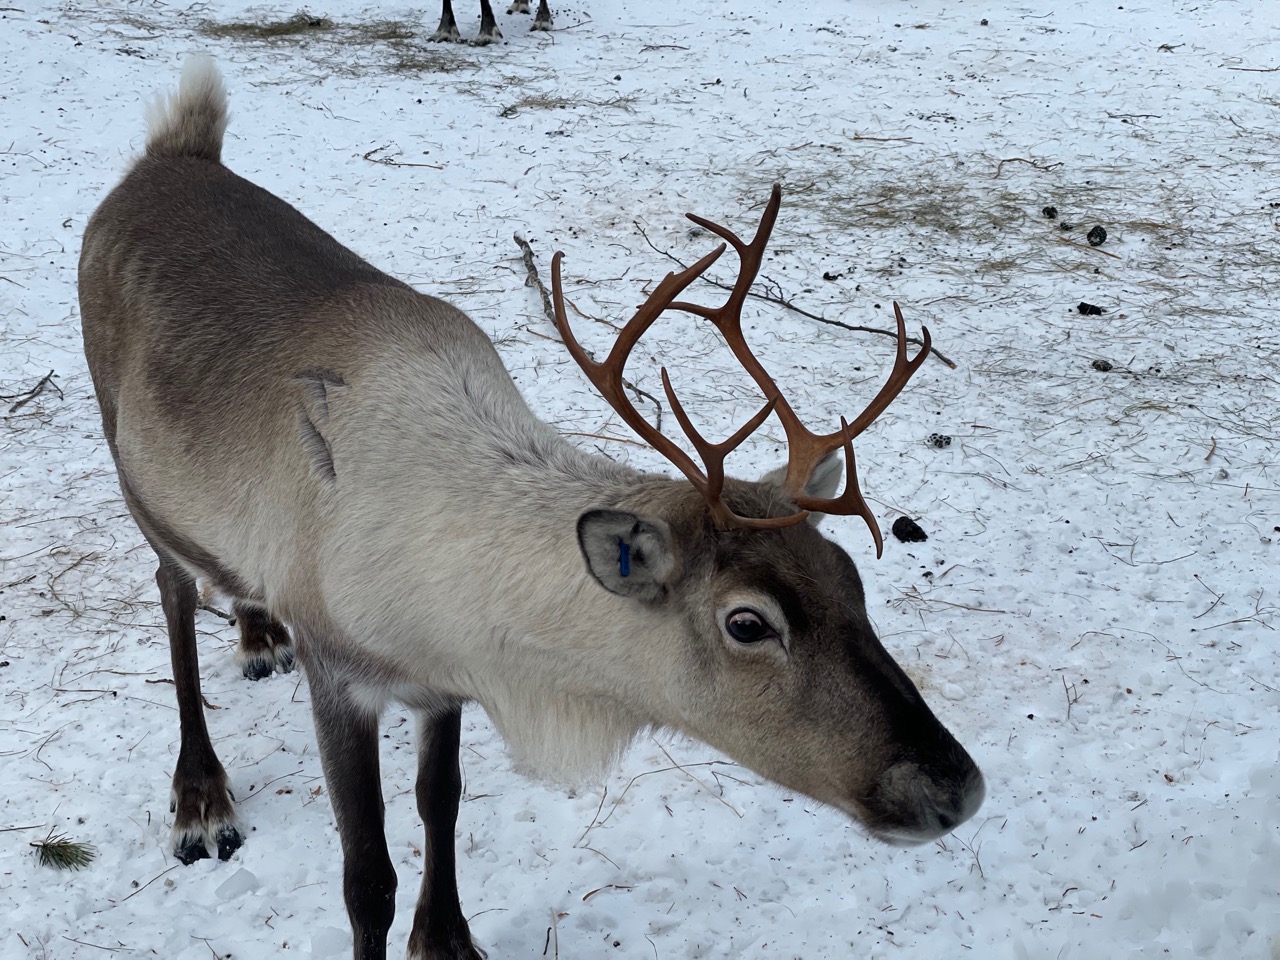 One of many reindeer